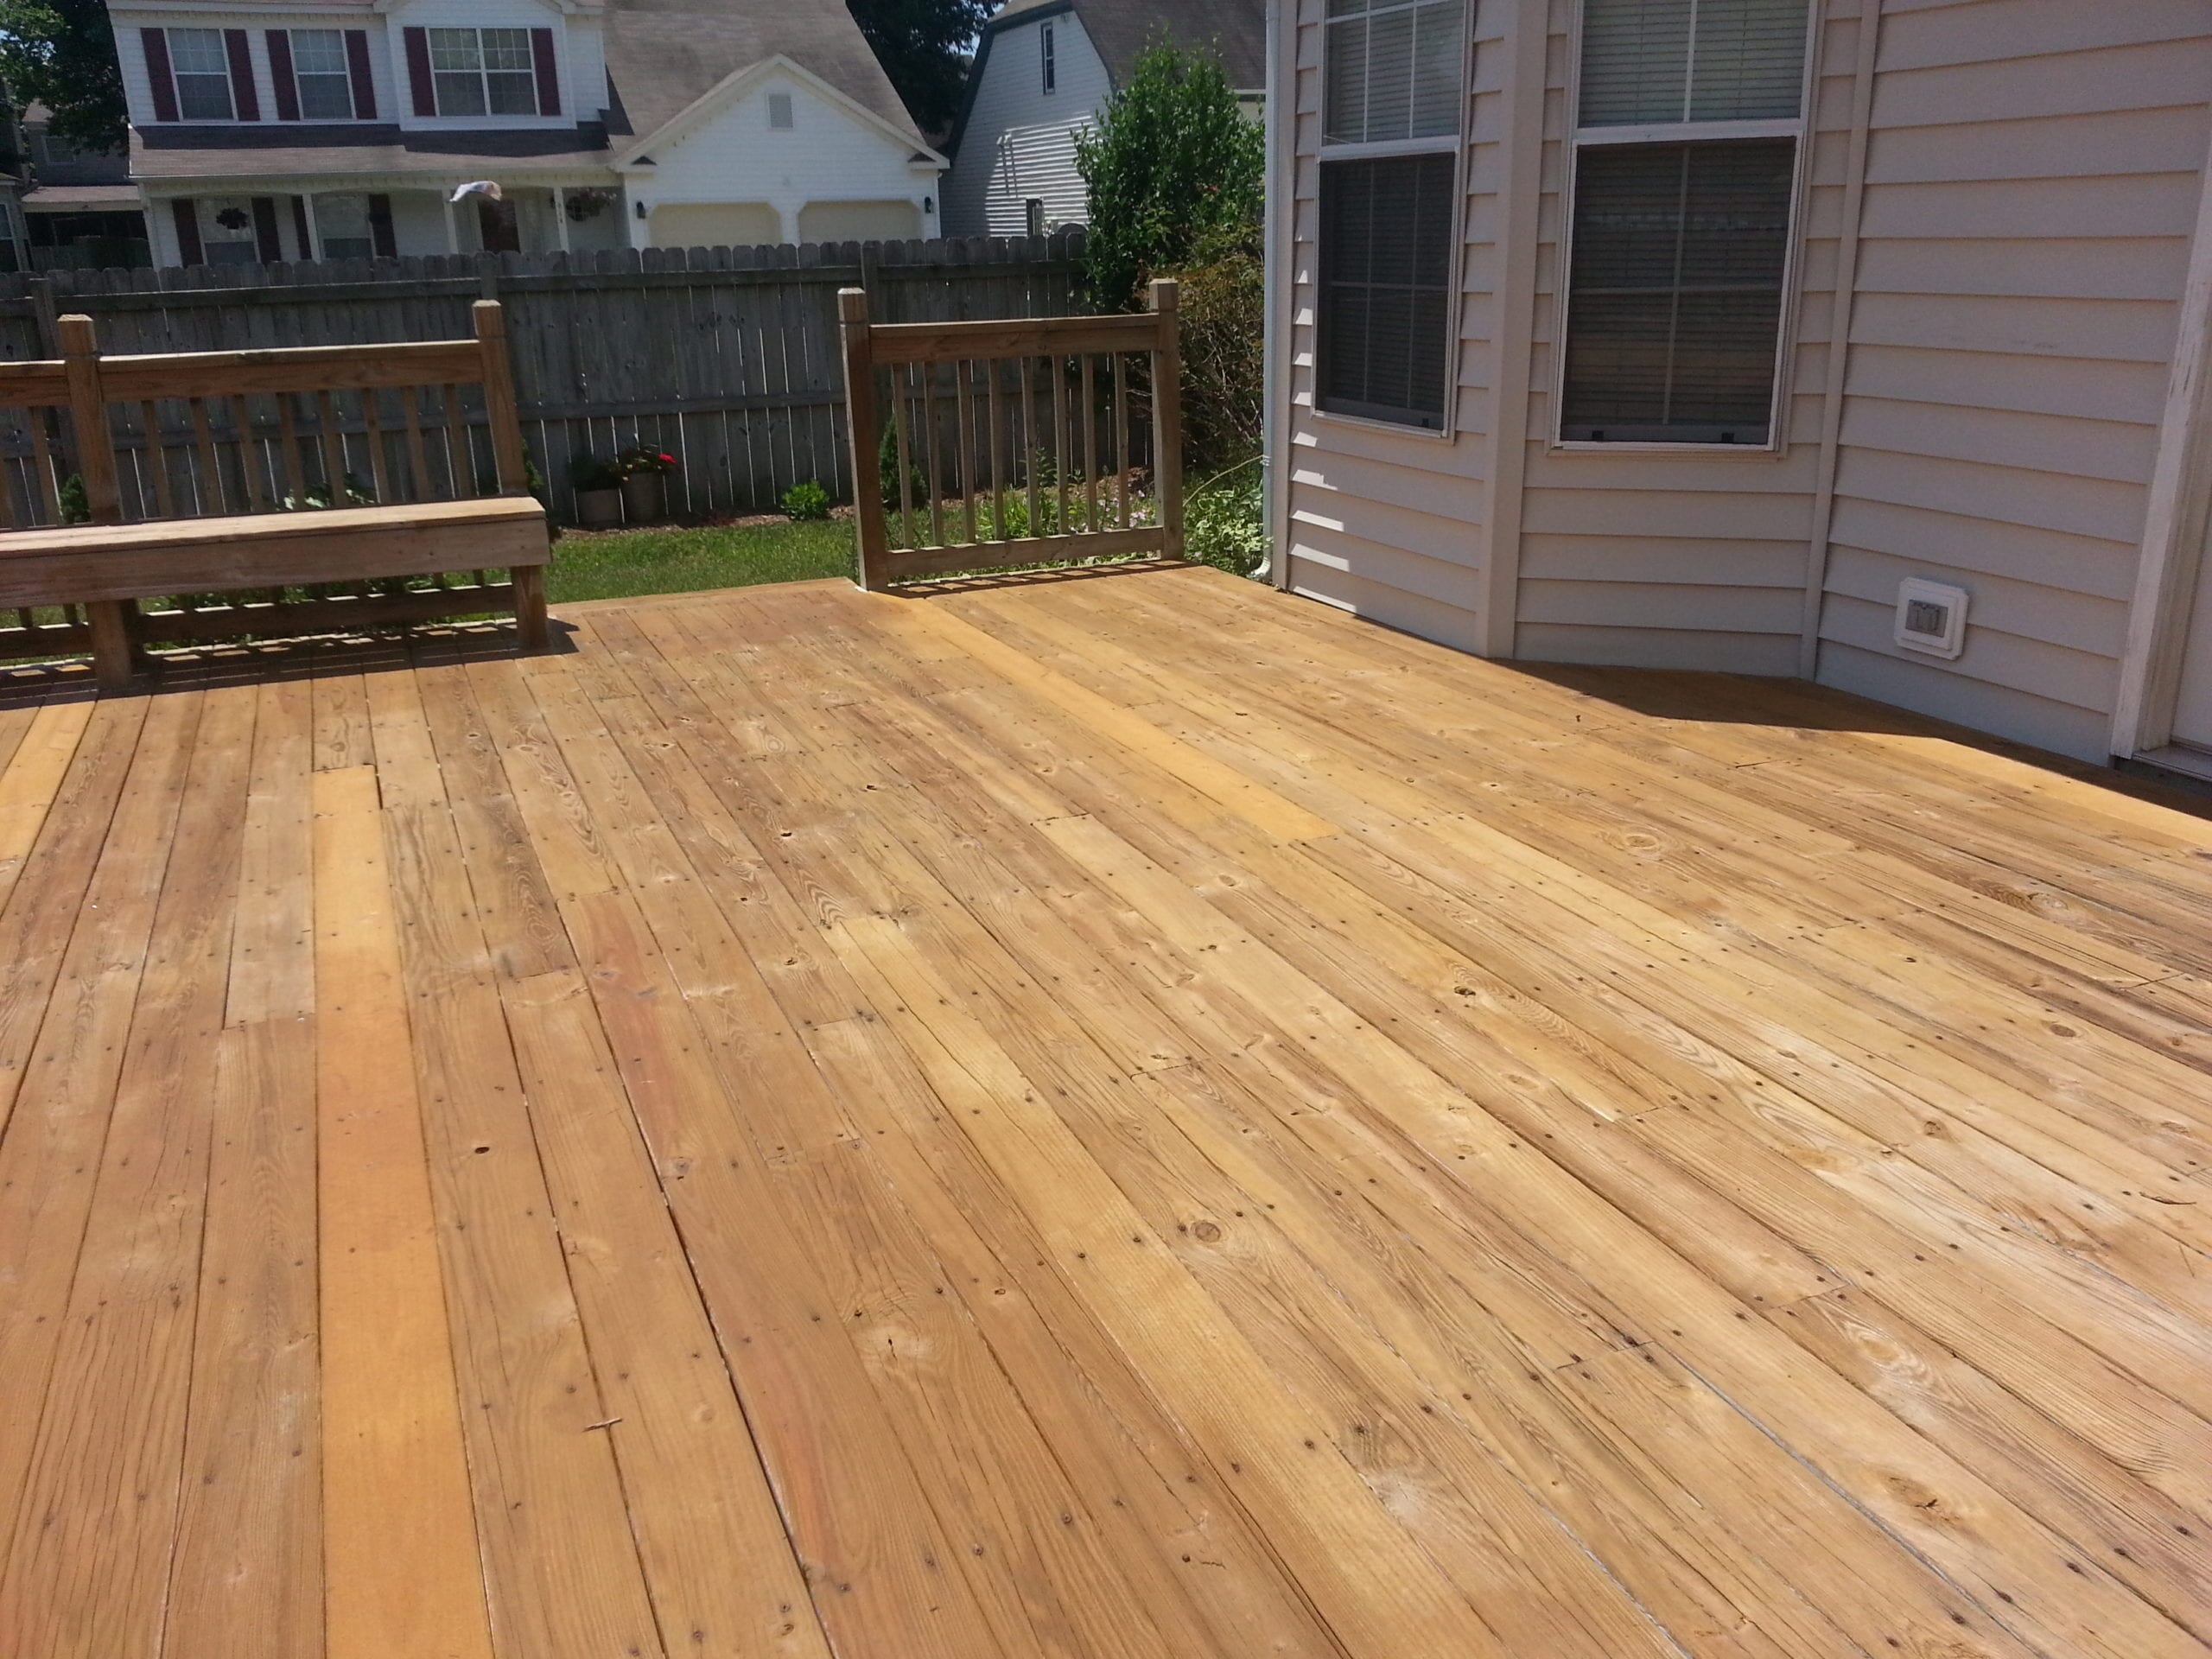 after deck cleaning & pressure washing in virginia beach